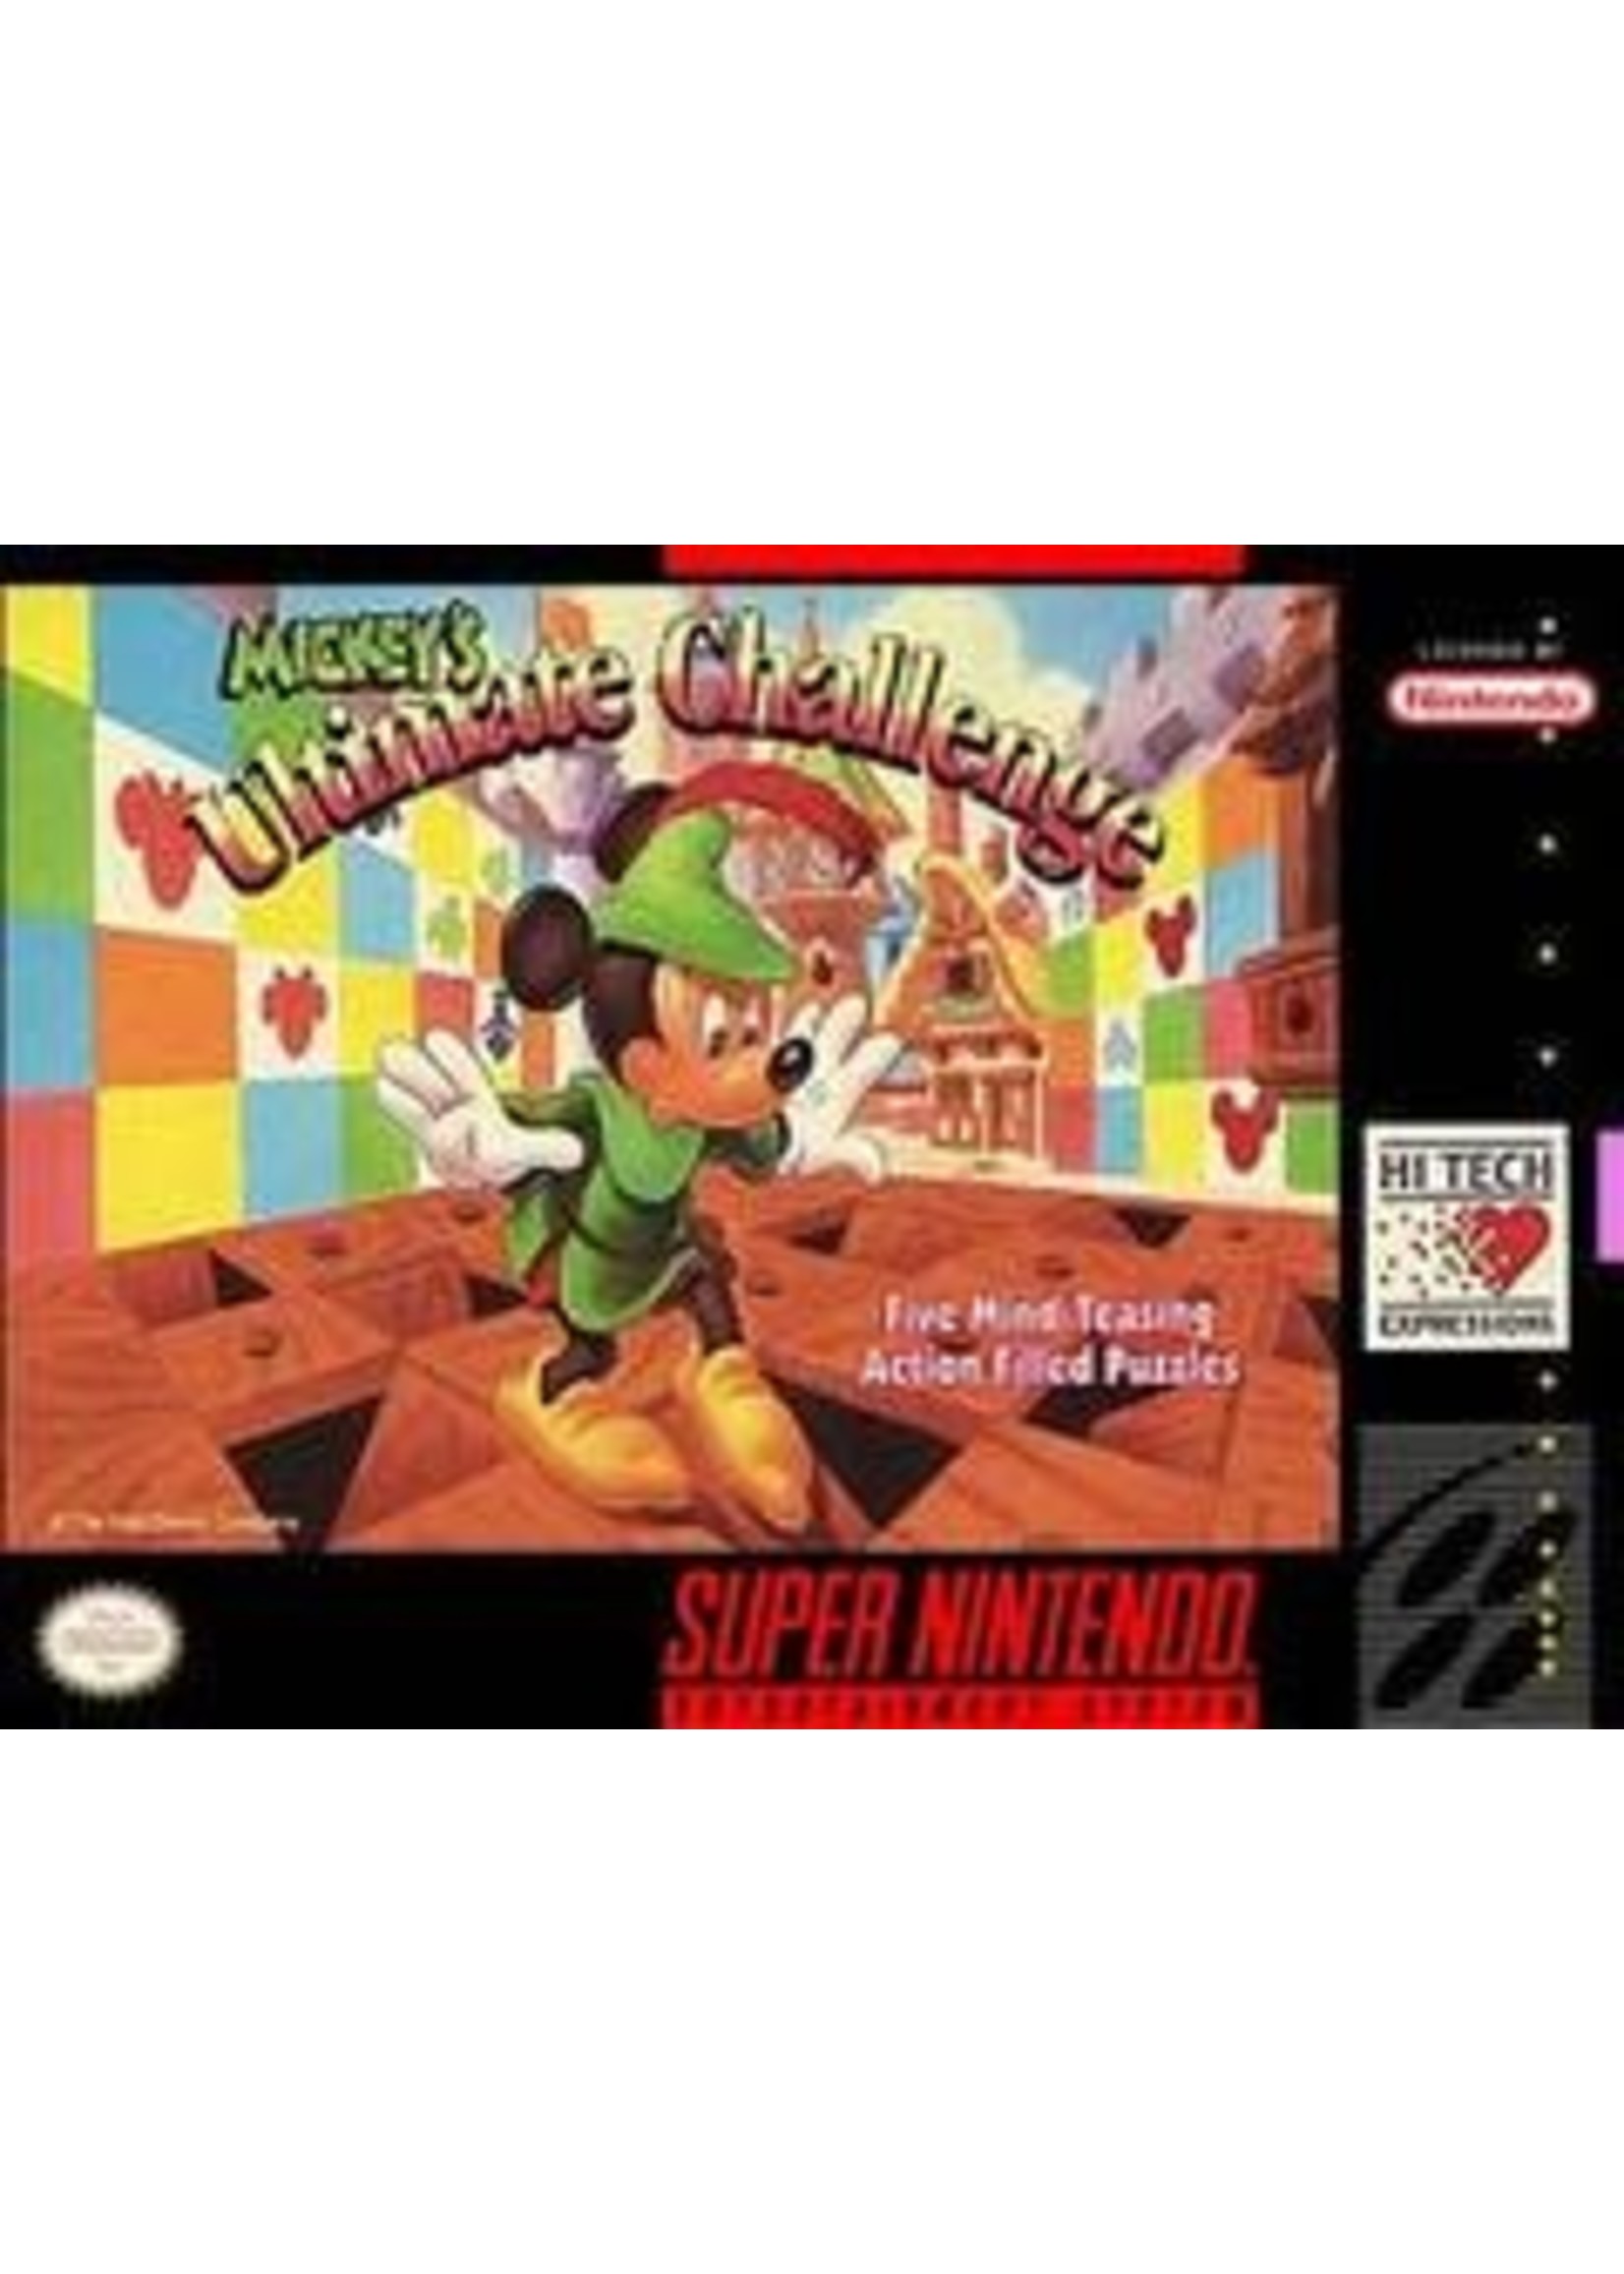 Mickey's Ultimate Challenge Super Nintendo CART ONLY